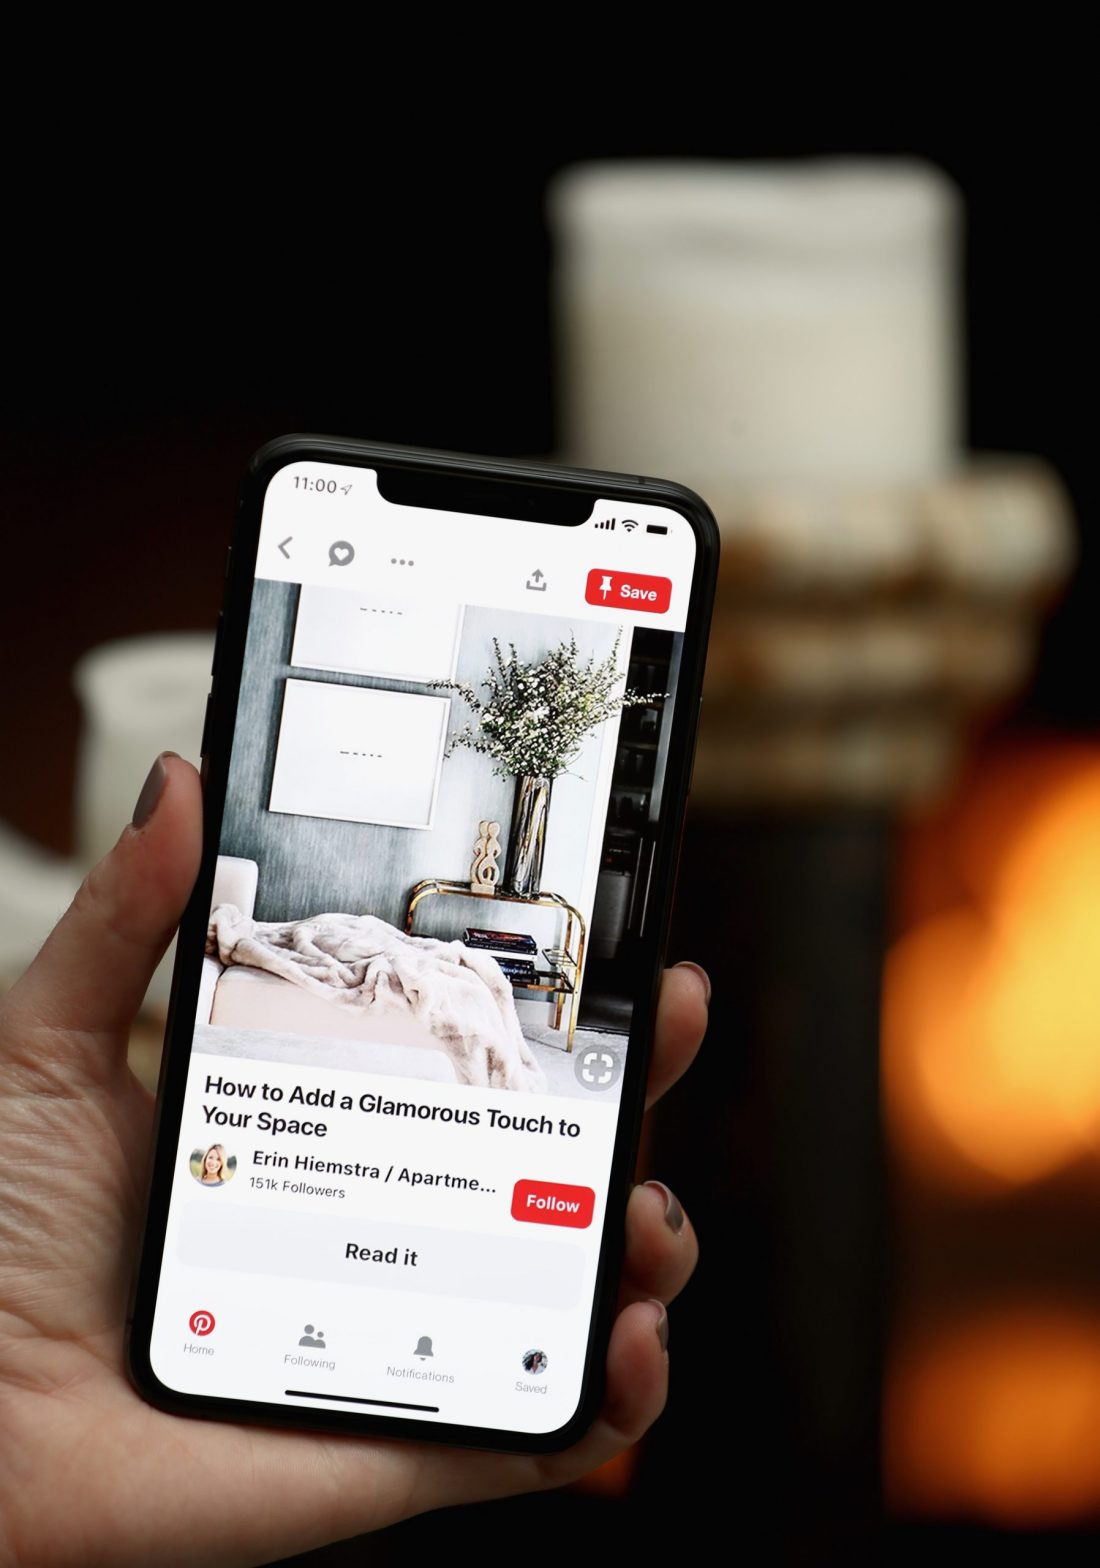 Pinterest Is A Visual Discovery Engine For Ideas Like Dinner Recipes, Home And Style Inspiration, And More